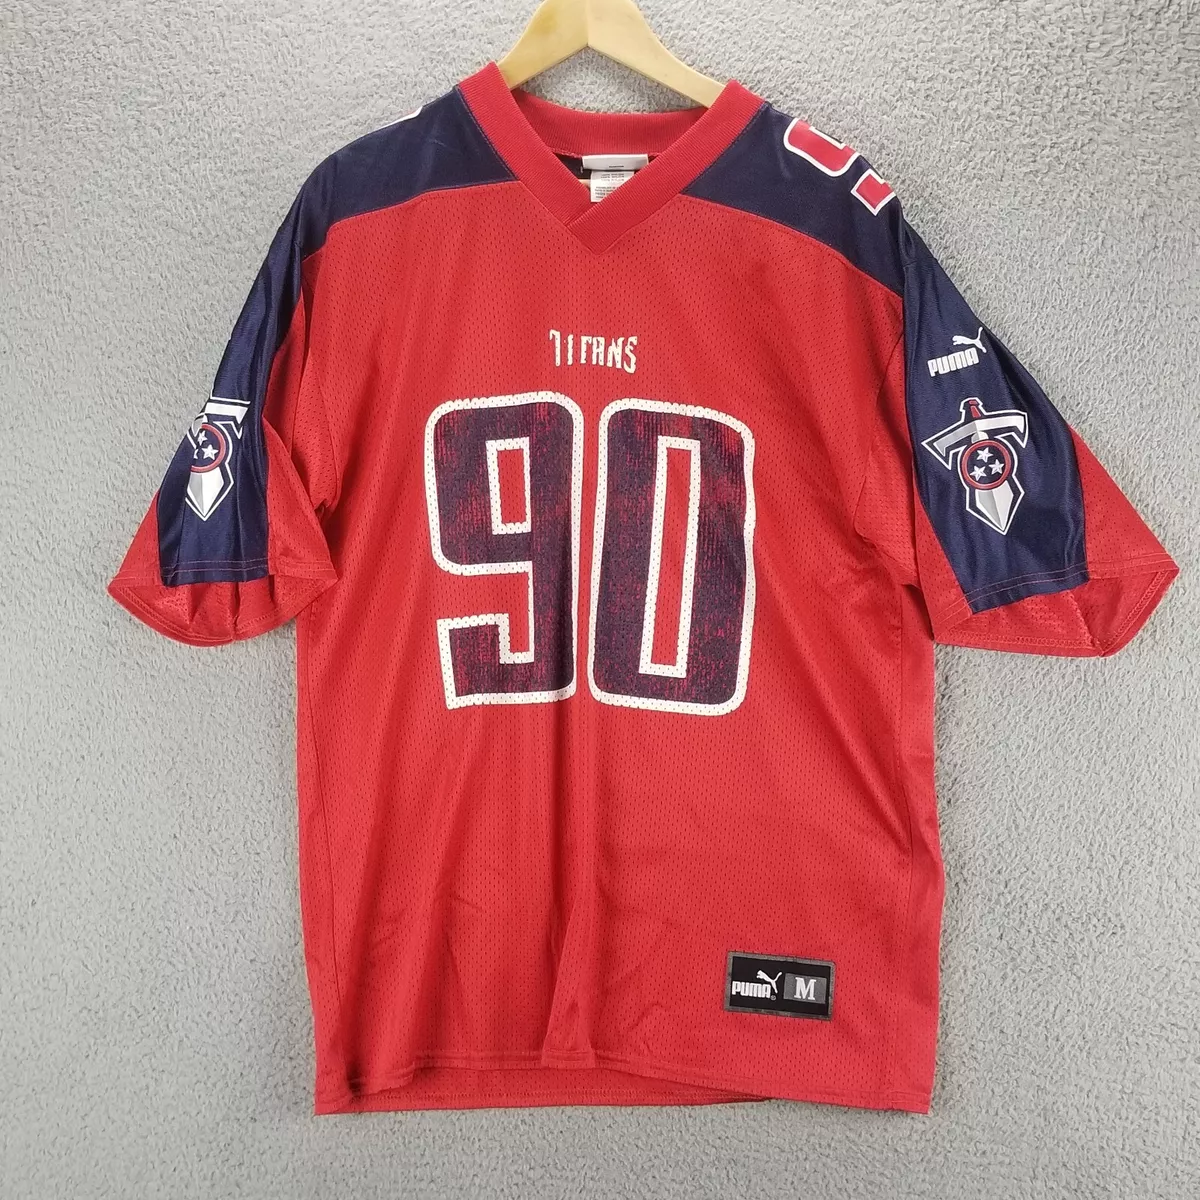 titans red jersey